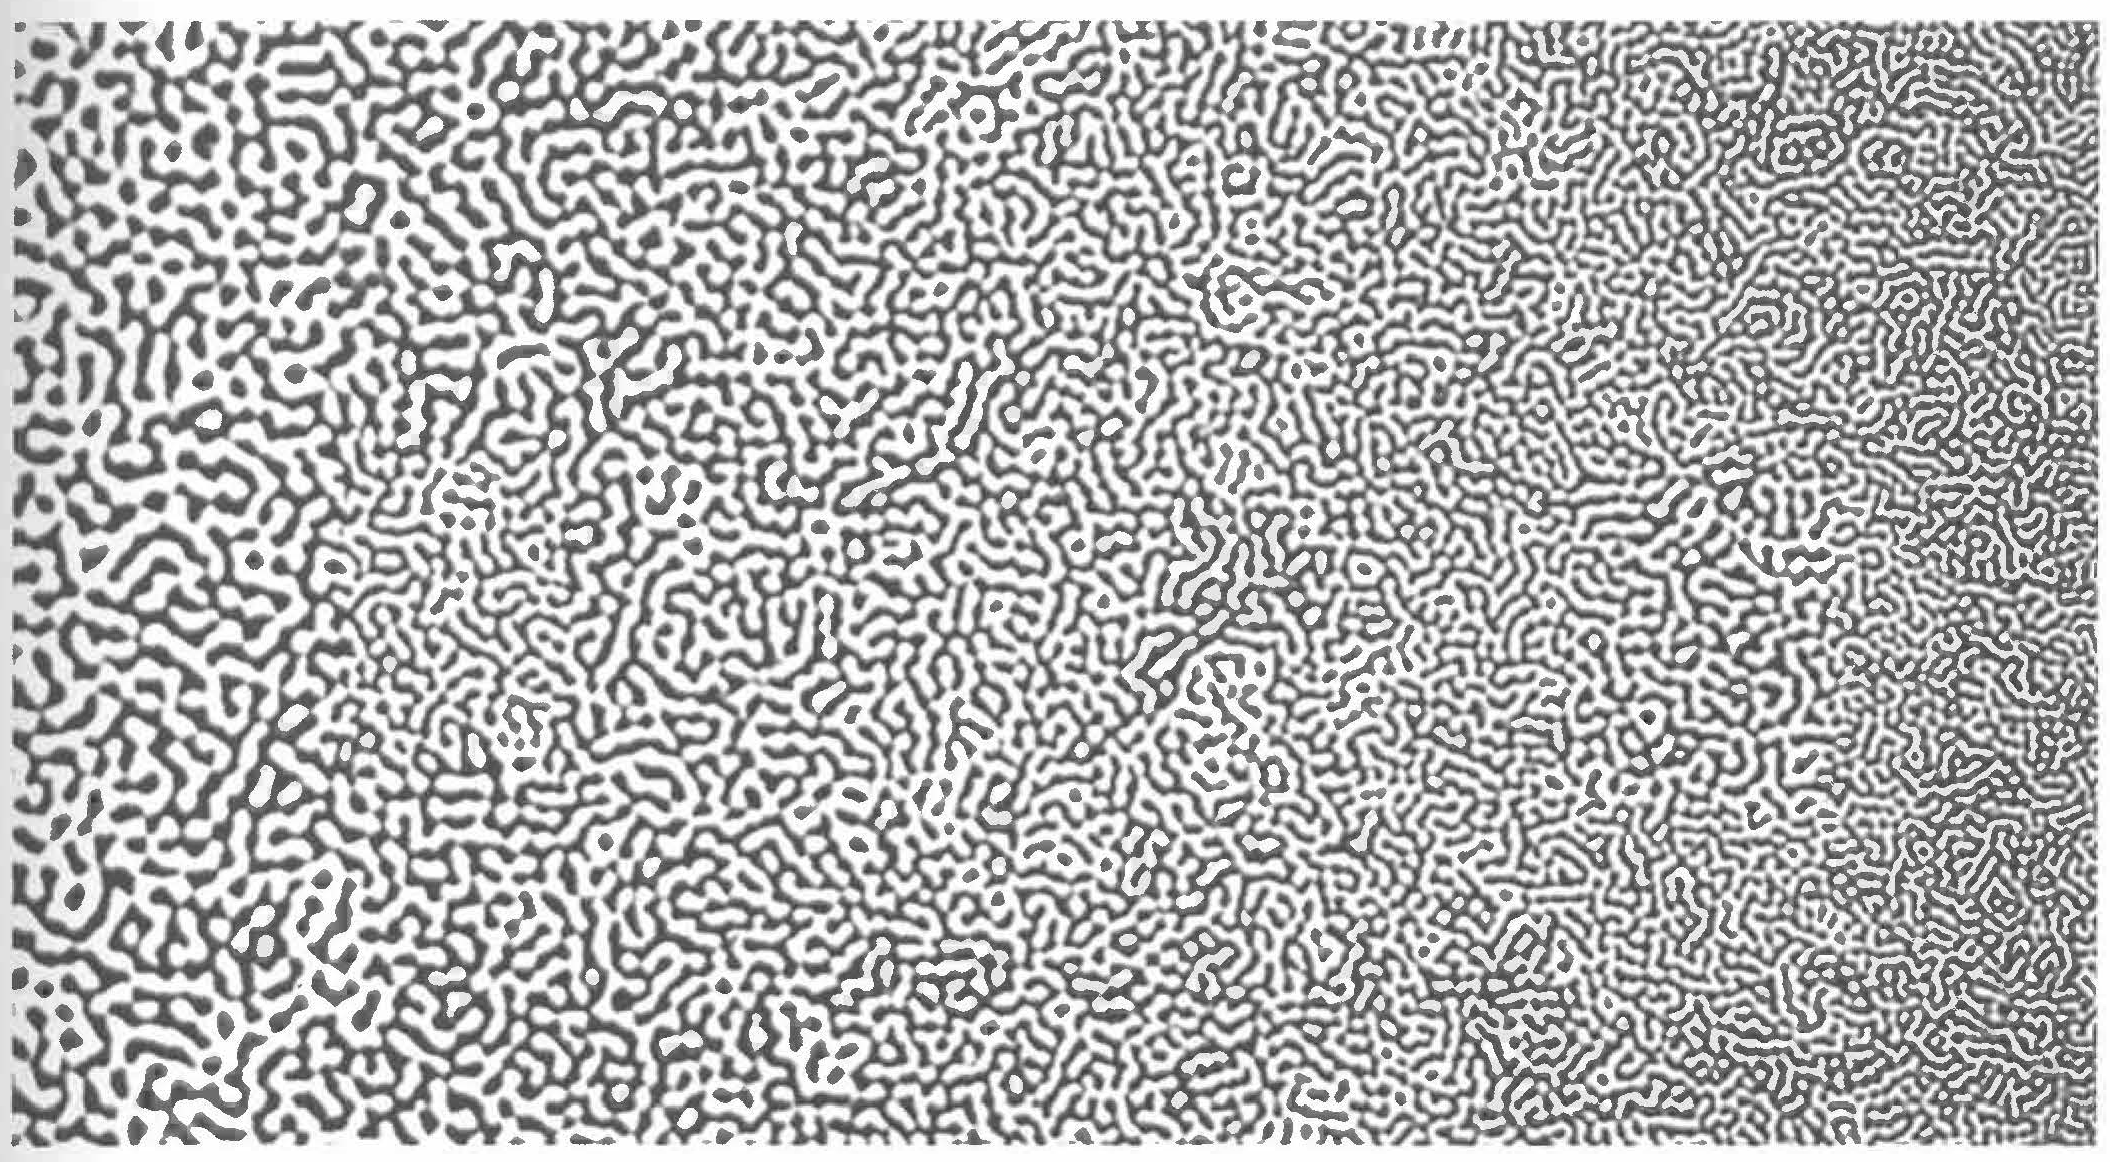 Black patterns on white background demonstrating visual perpection is drawn toward contrast. Originally from C. Ware, *Information Visualization: Perception for Design*, 2004? Source: S. Few, *Now You See It*, 2009, p. 33.